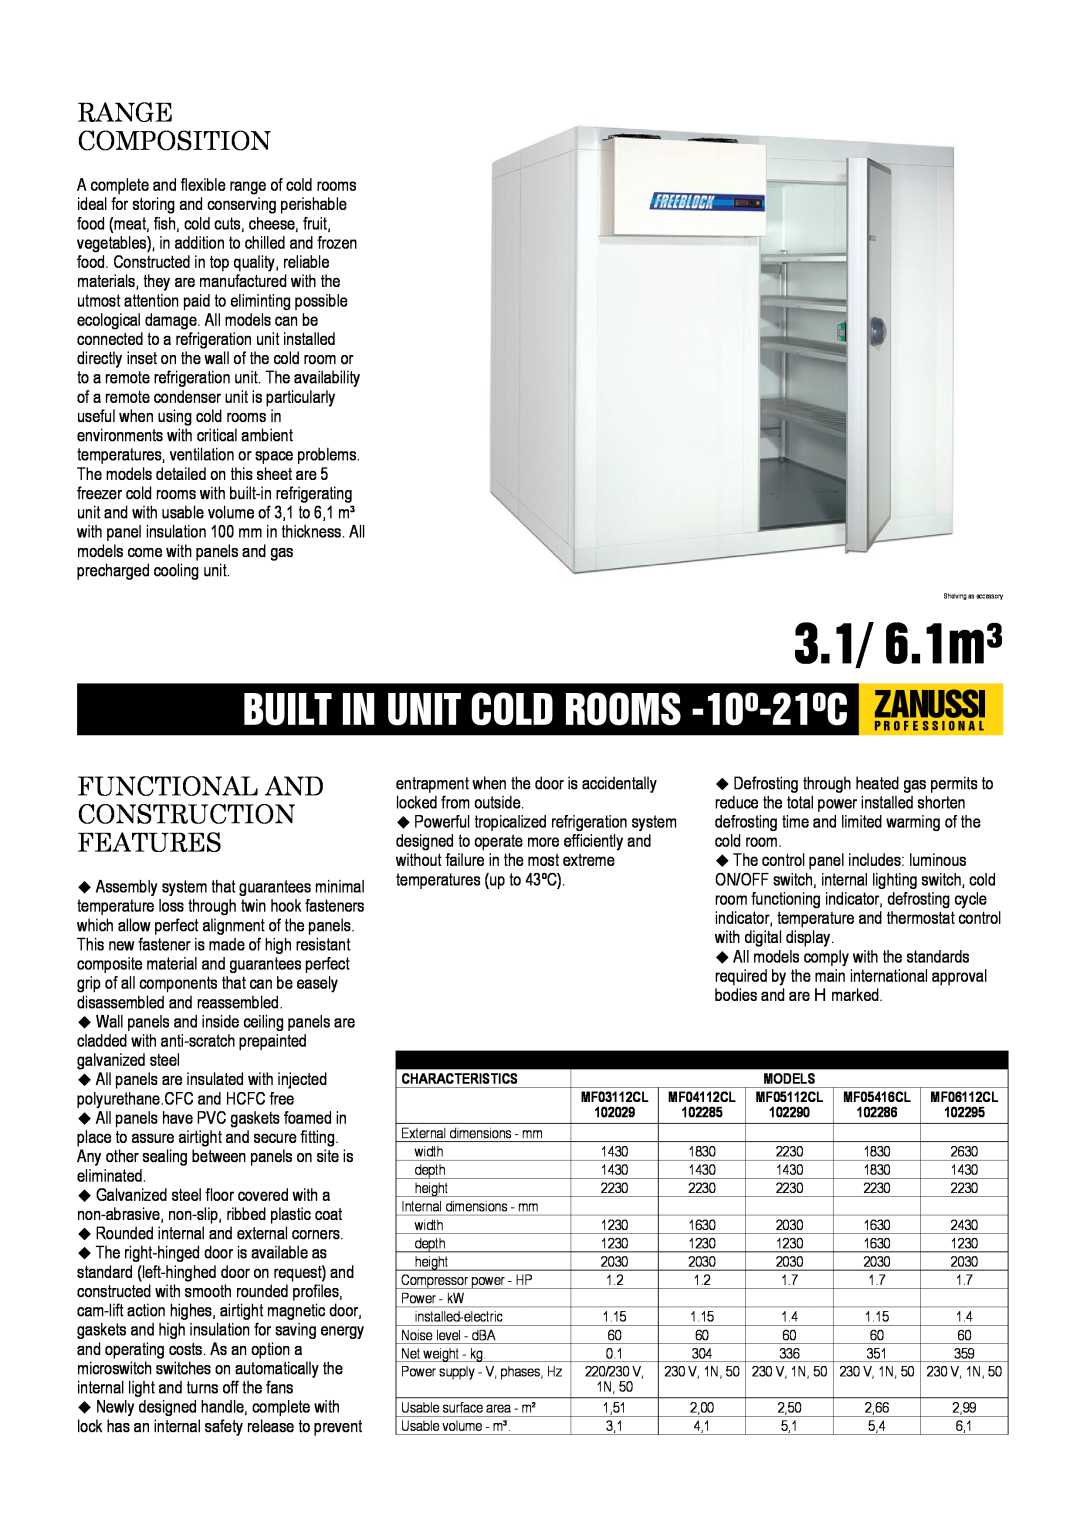 Zanussi MF06112CL, MF05416CL, MF04112CL dimensions 3.1/ 6.1m³, Range Composition, Functional And Construction Features 